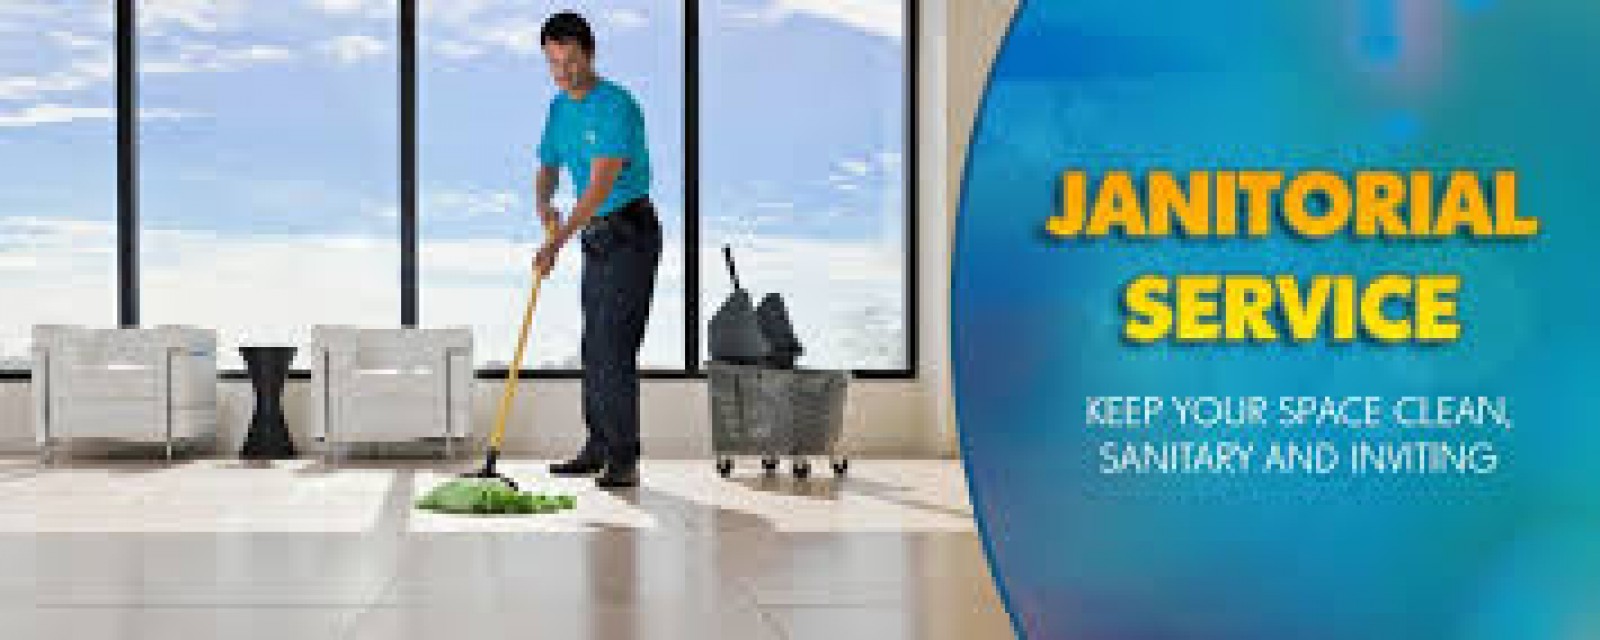 Facility Service - Smart Cleaning Service